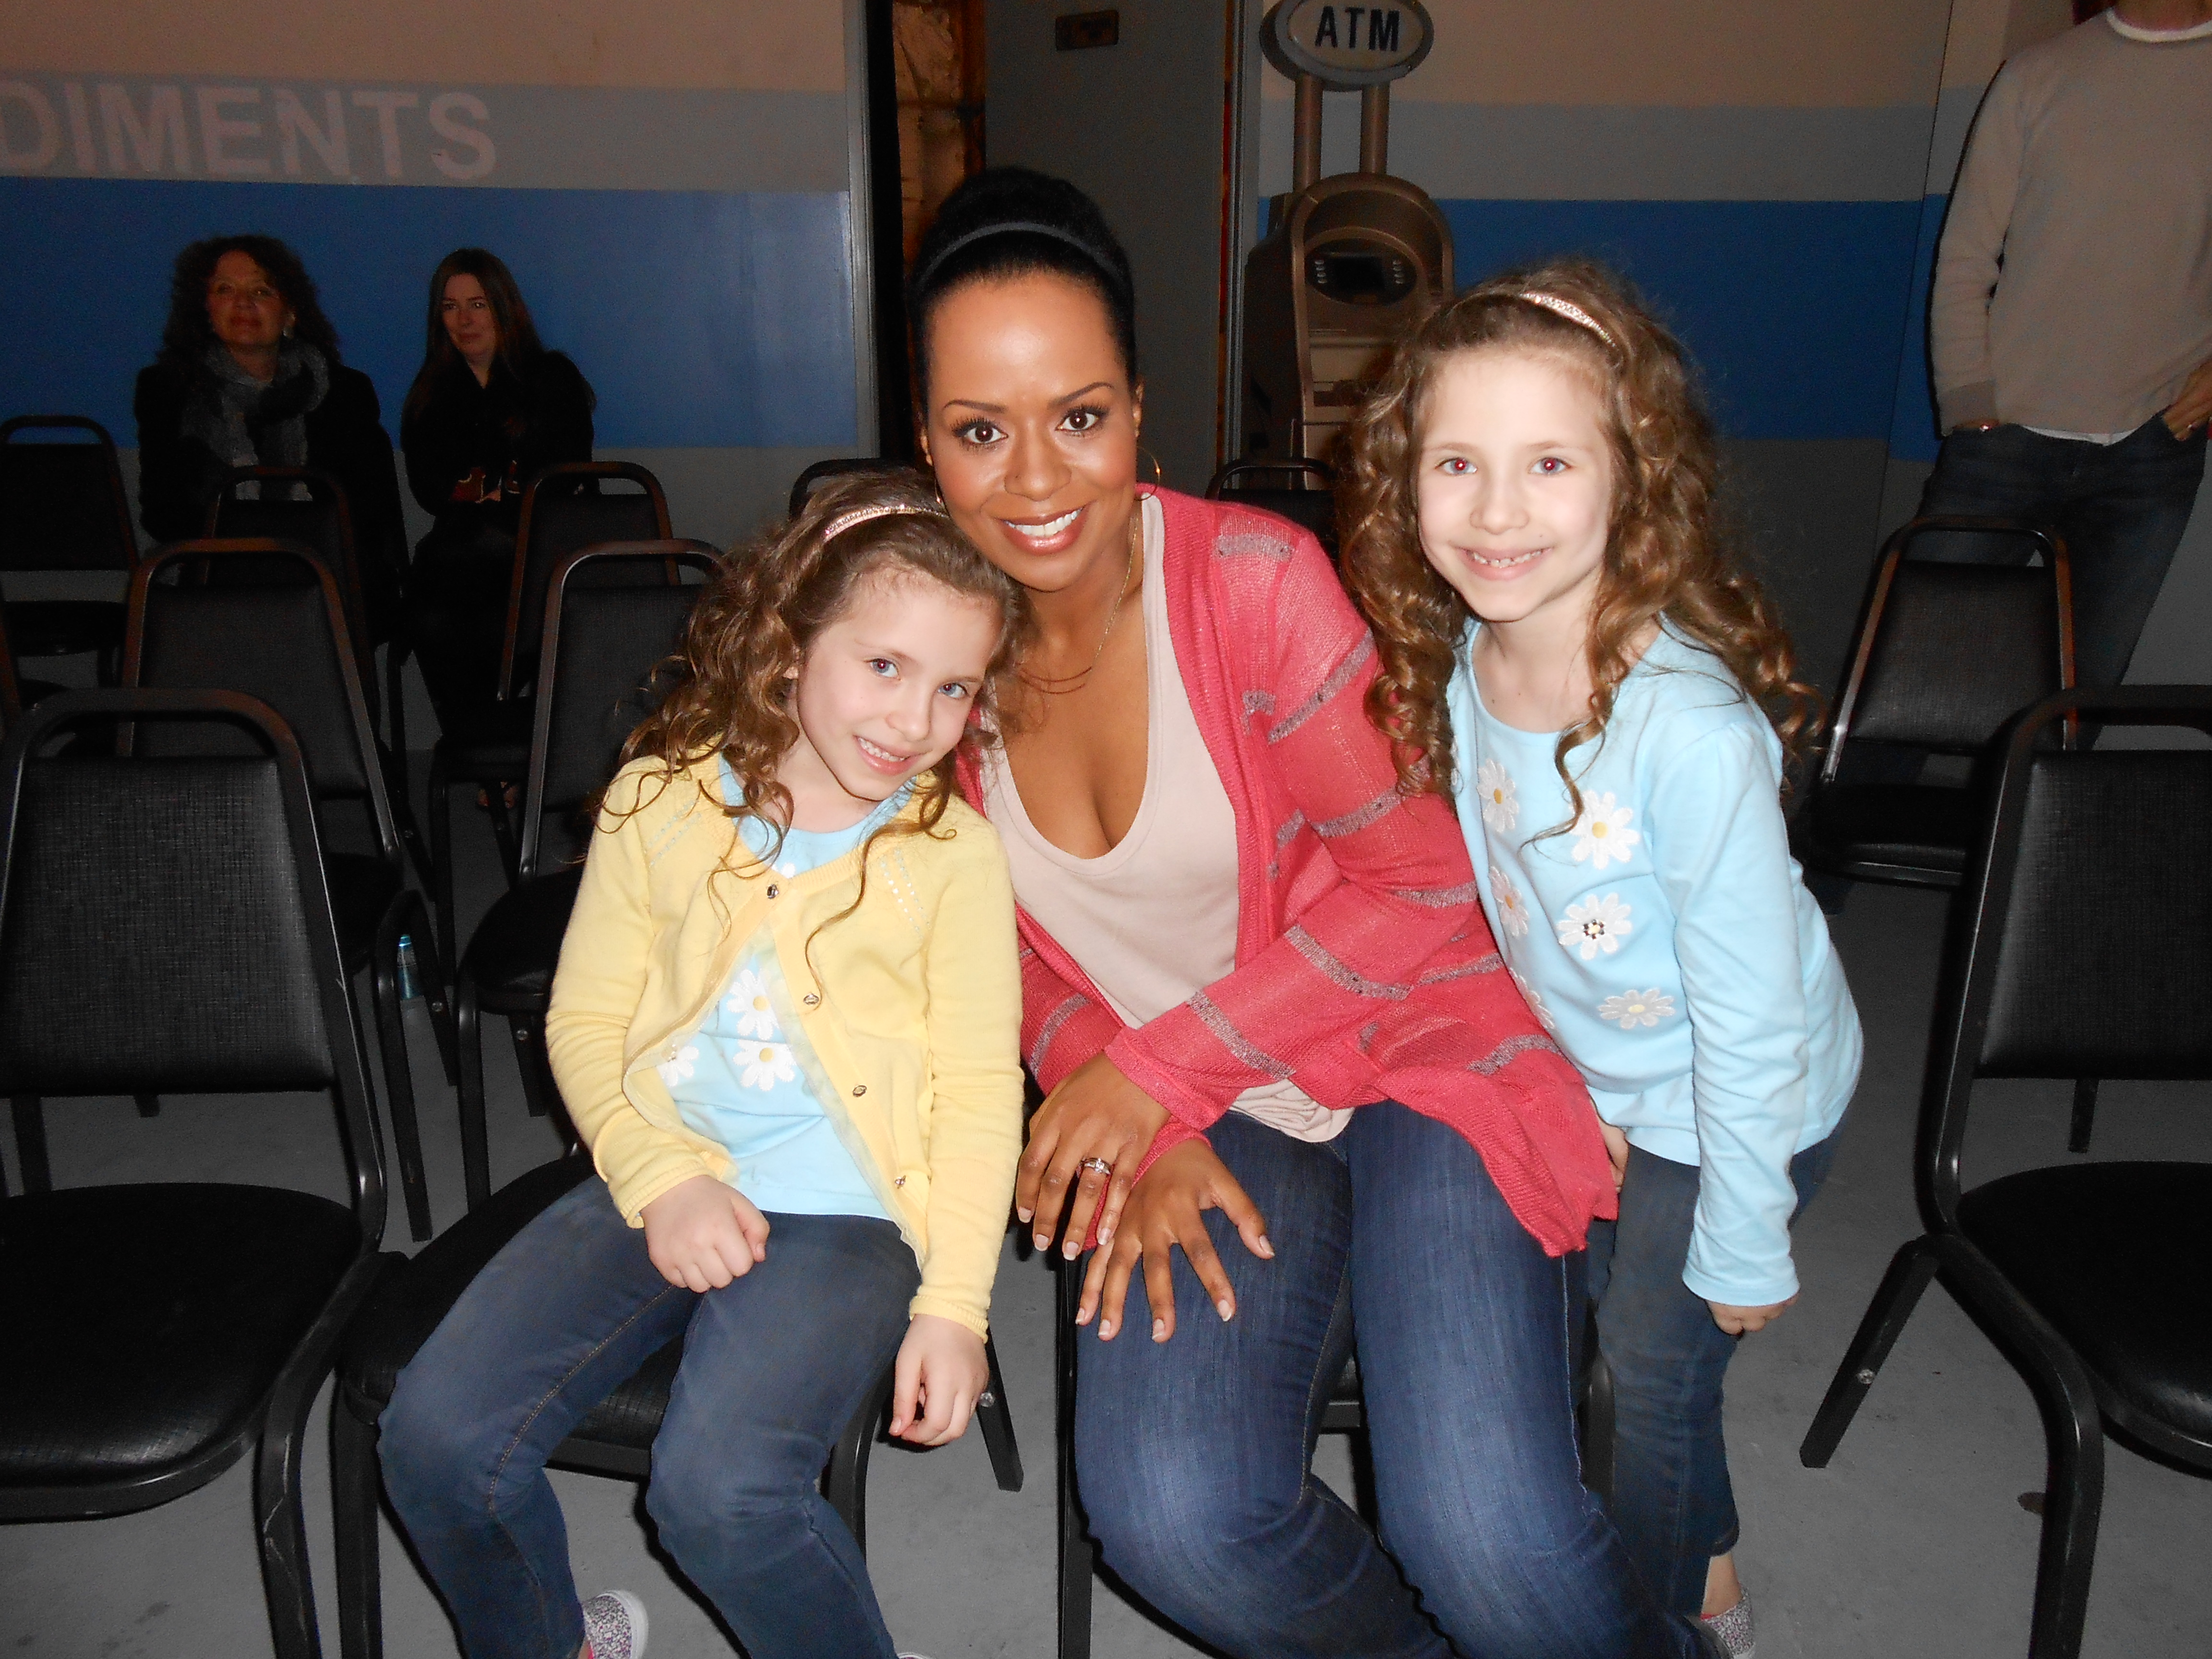 Bianca and Chiara Dambrosio on set of Guys with Kids with Tempestt Bledsoe. March 2012